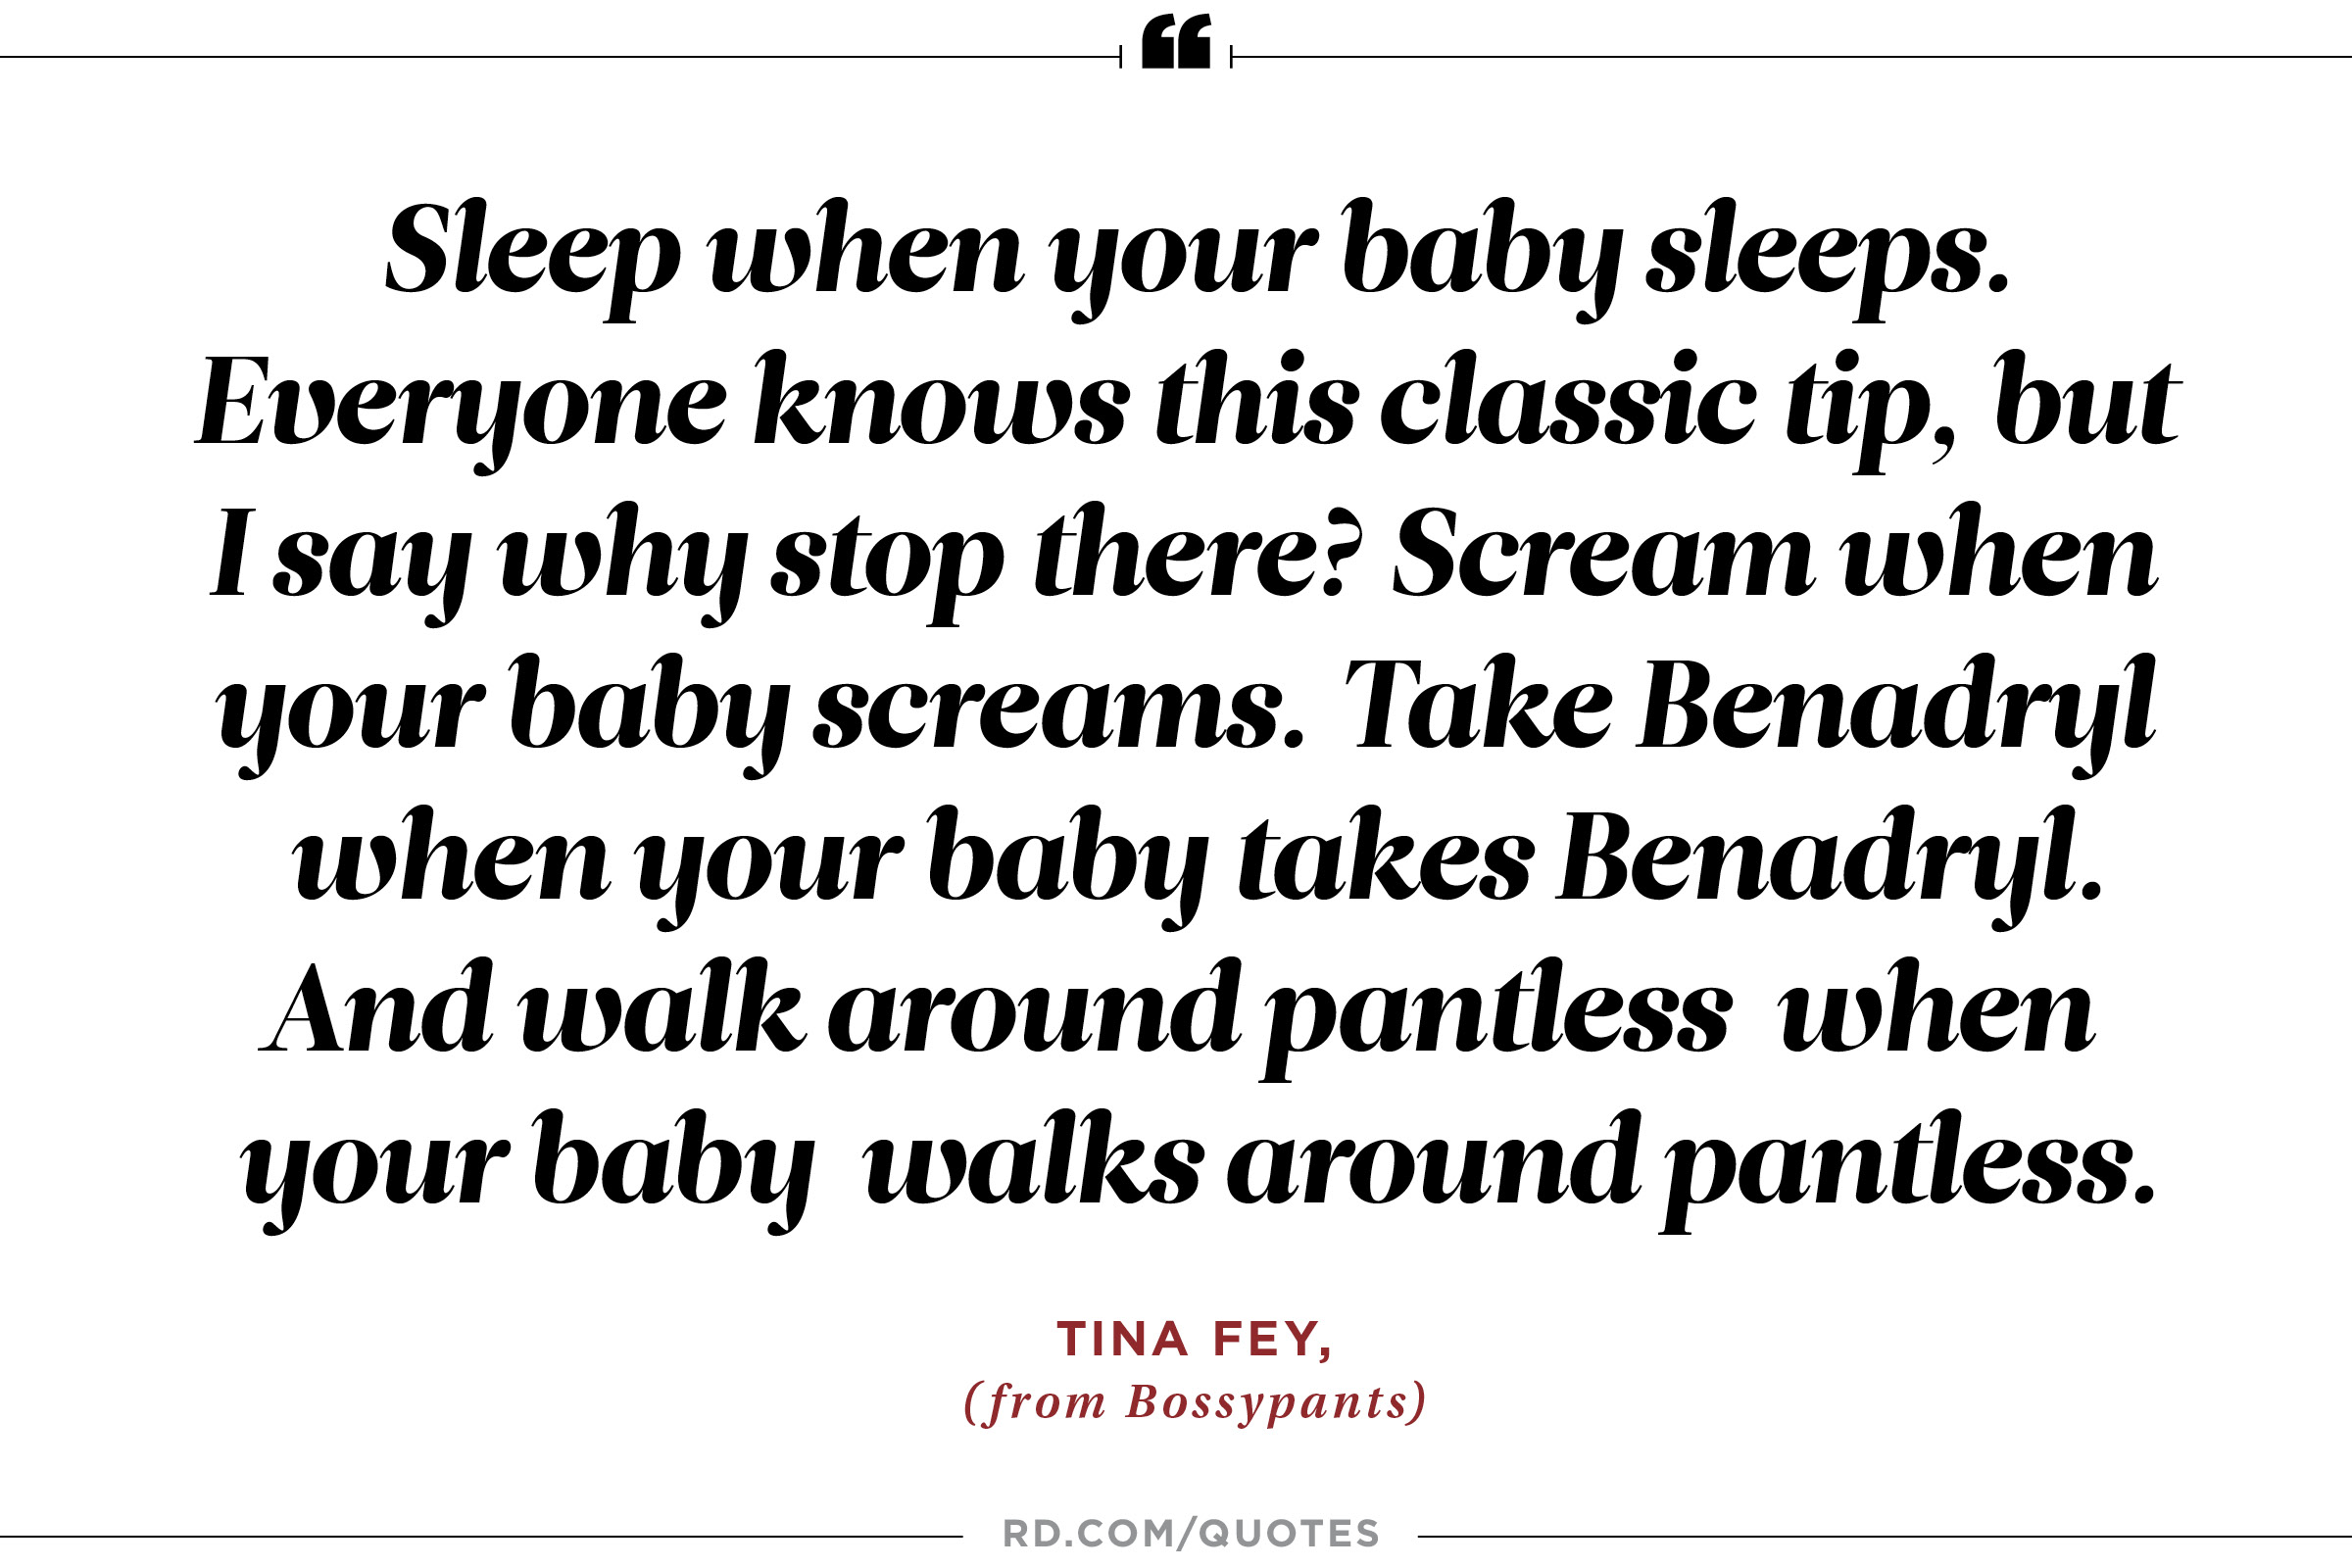 Sleep when your baby sleeps. Everyone knows this classic tip, but I say why stop there? Scream when your baby screams. Take Benadryl when your baby takes Benadryl. And walk around pantless when your baby walks around pantless. Tina Fey